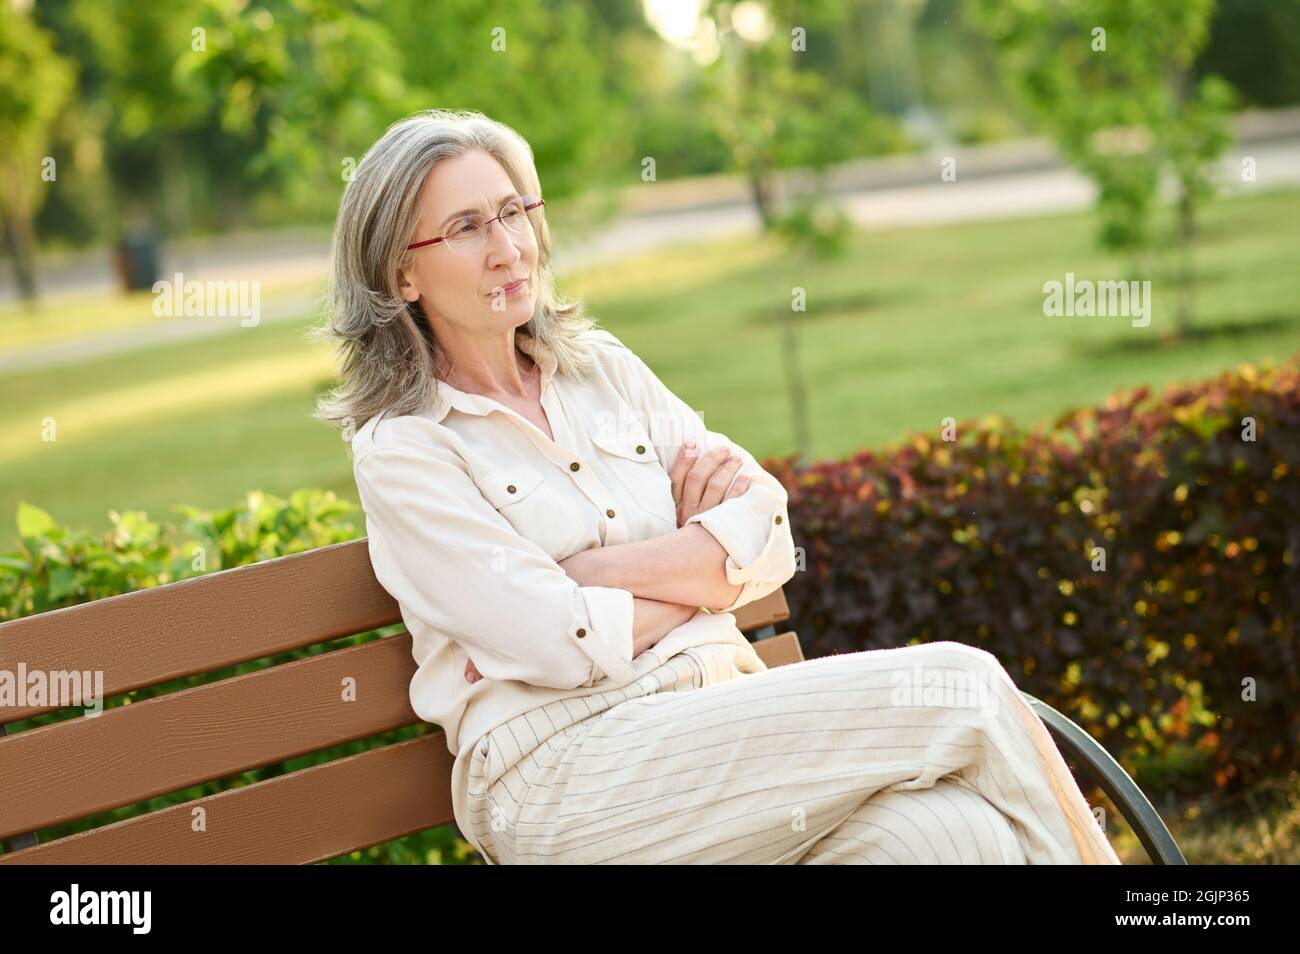 Confident adult woman sitting on park bench Stock Photo